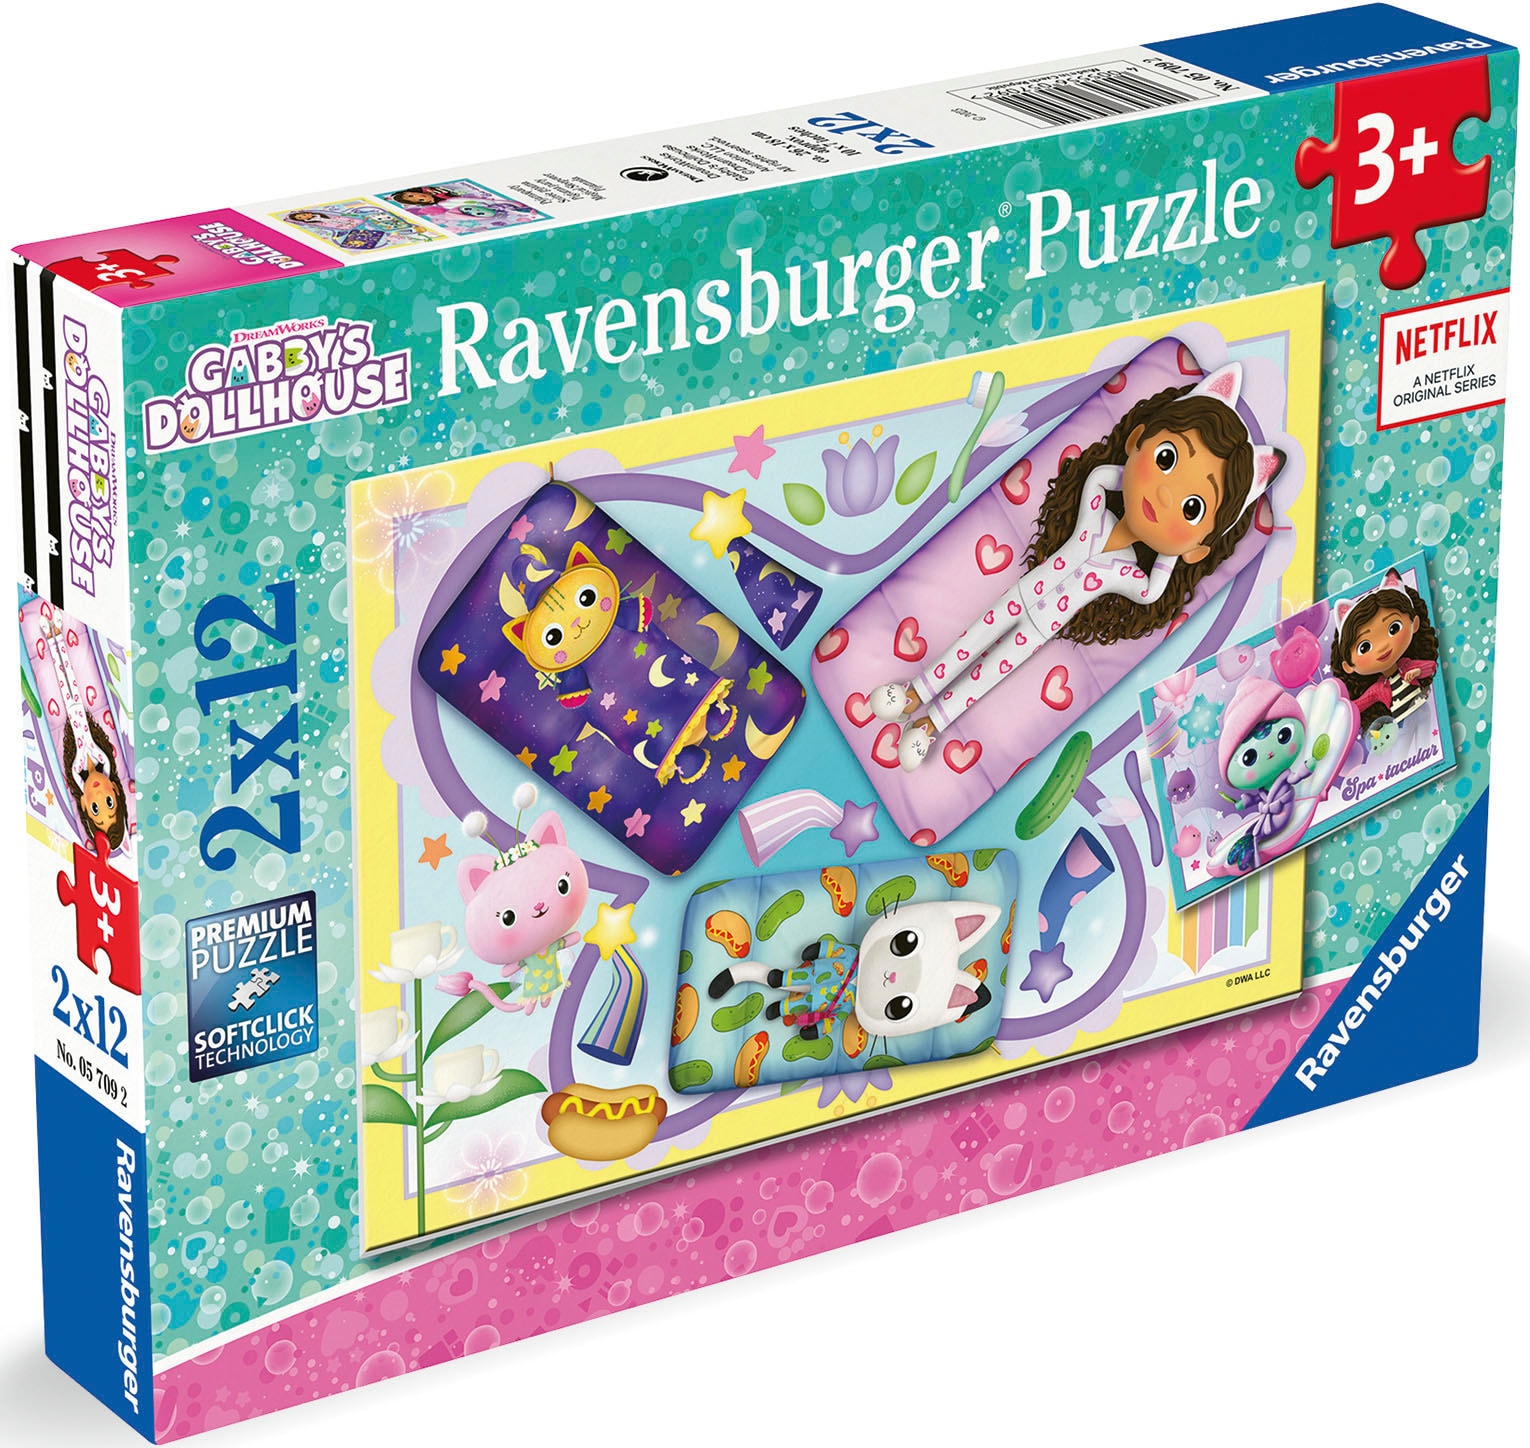 Ravensburger Puzzle »Gabby's Dollhouse, 2x12«, Made in Europe